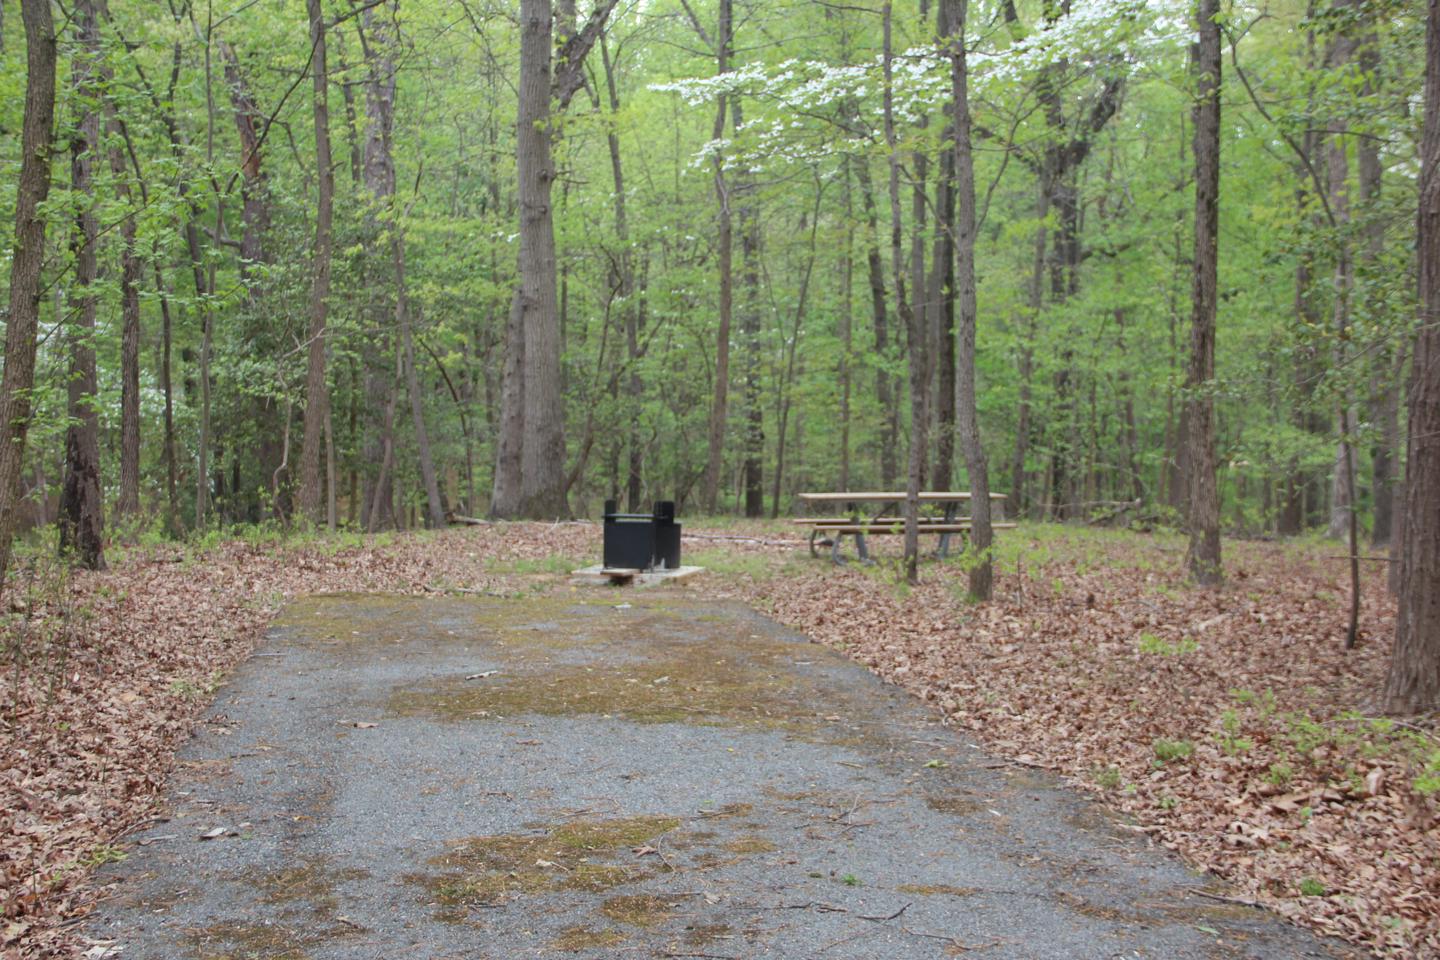 C101 C Loop of the Greenbelt Park Maryland campground